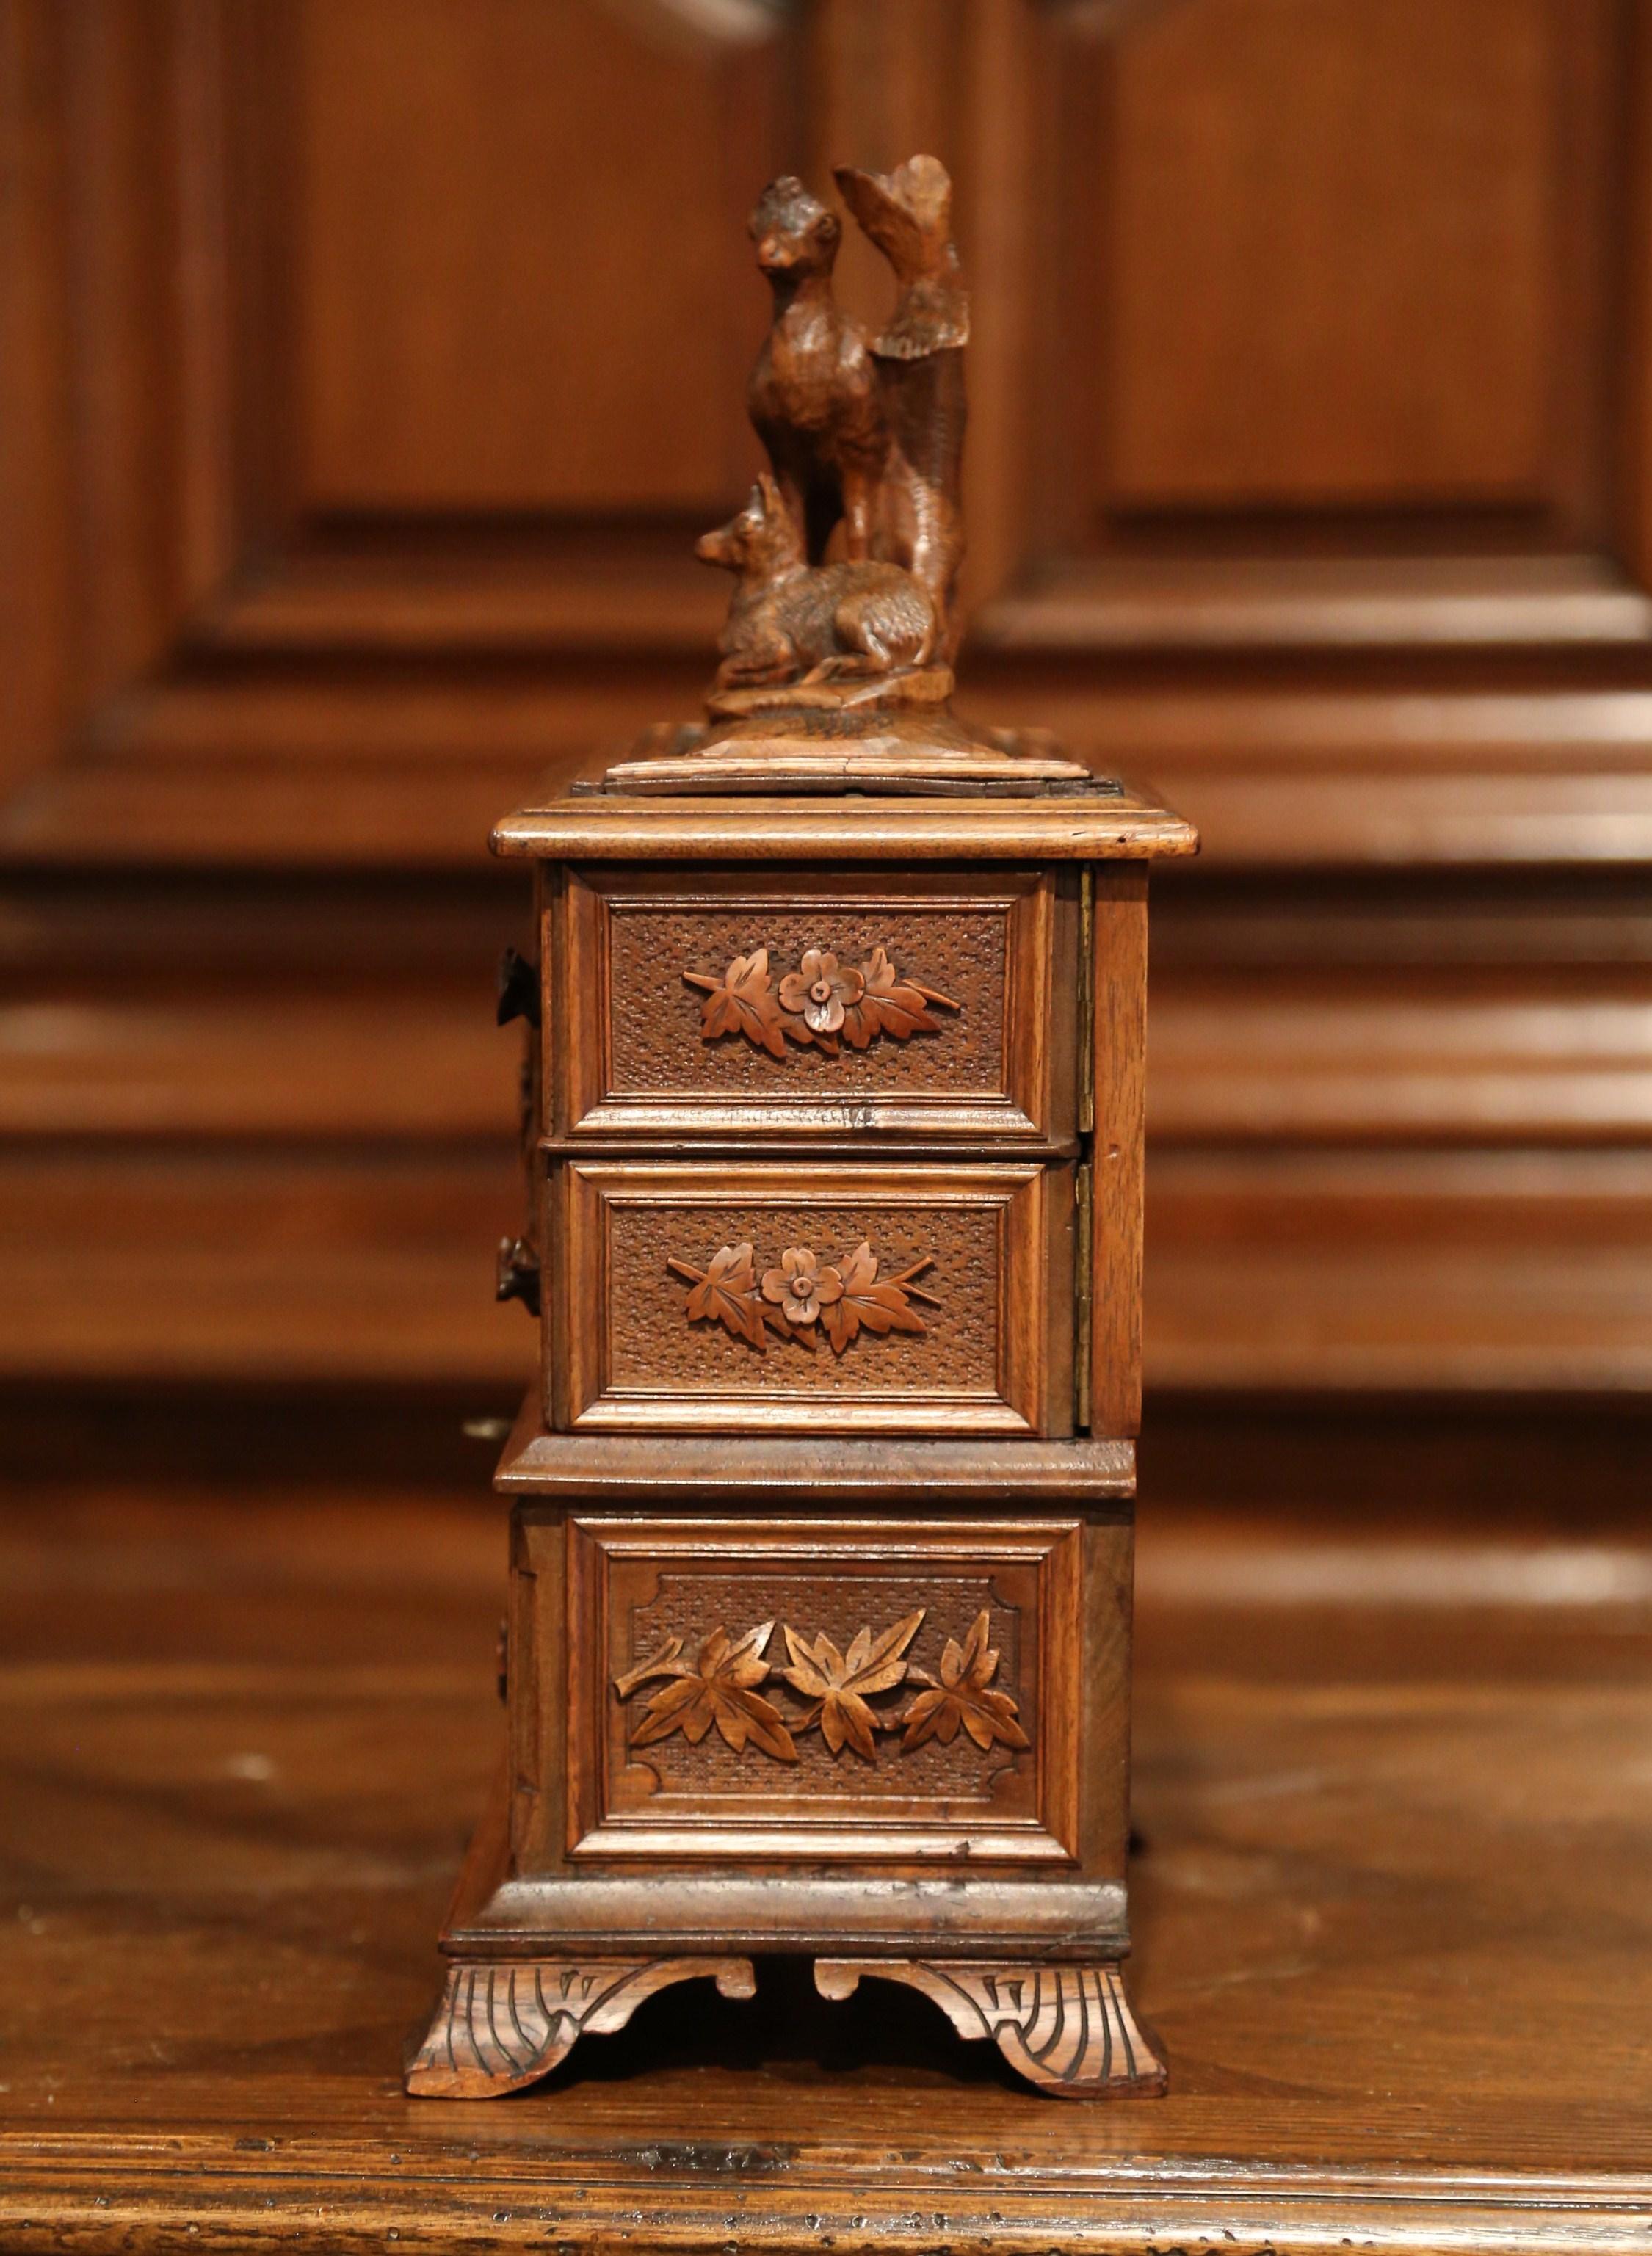 19th Century French Black Forest Carved Walnut Jewelry Box with Deer and Drawers 7